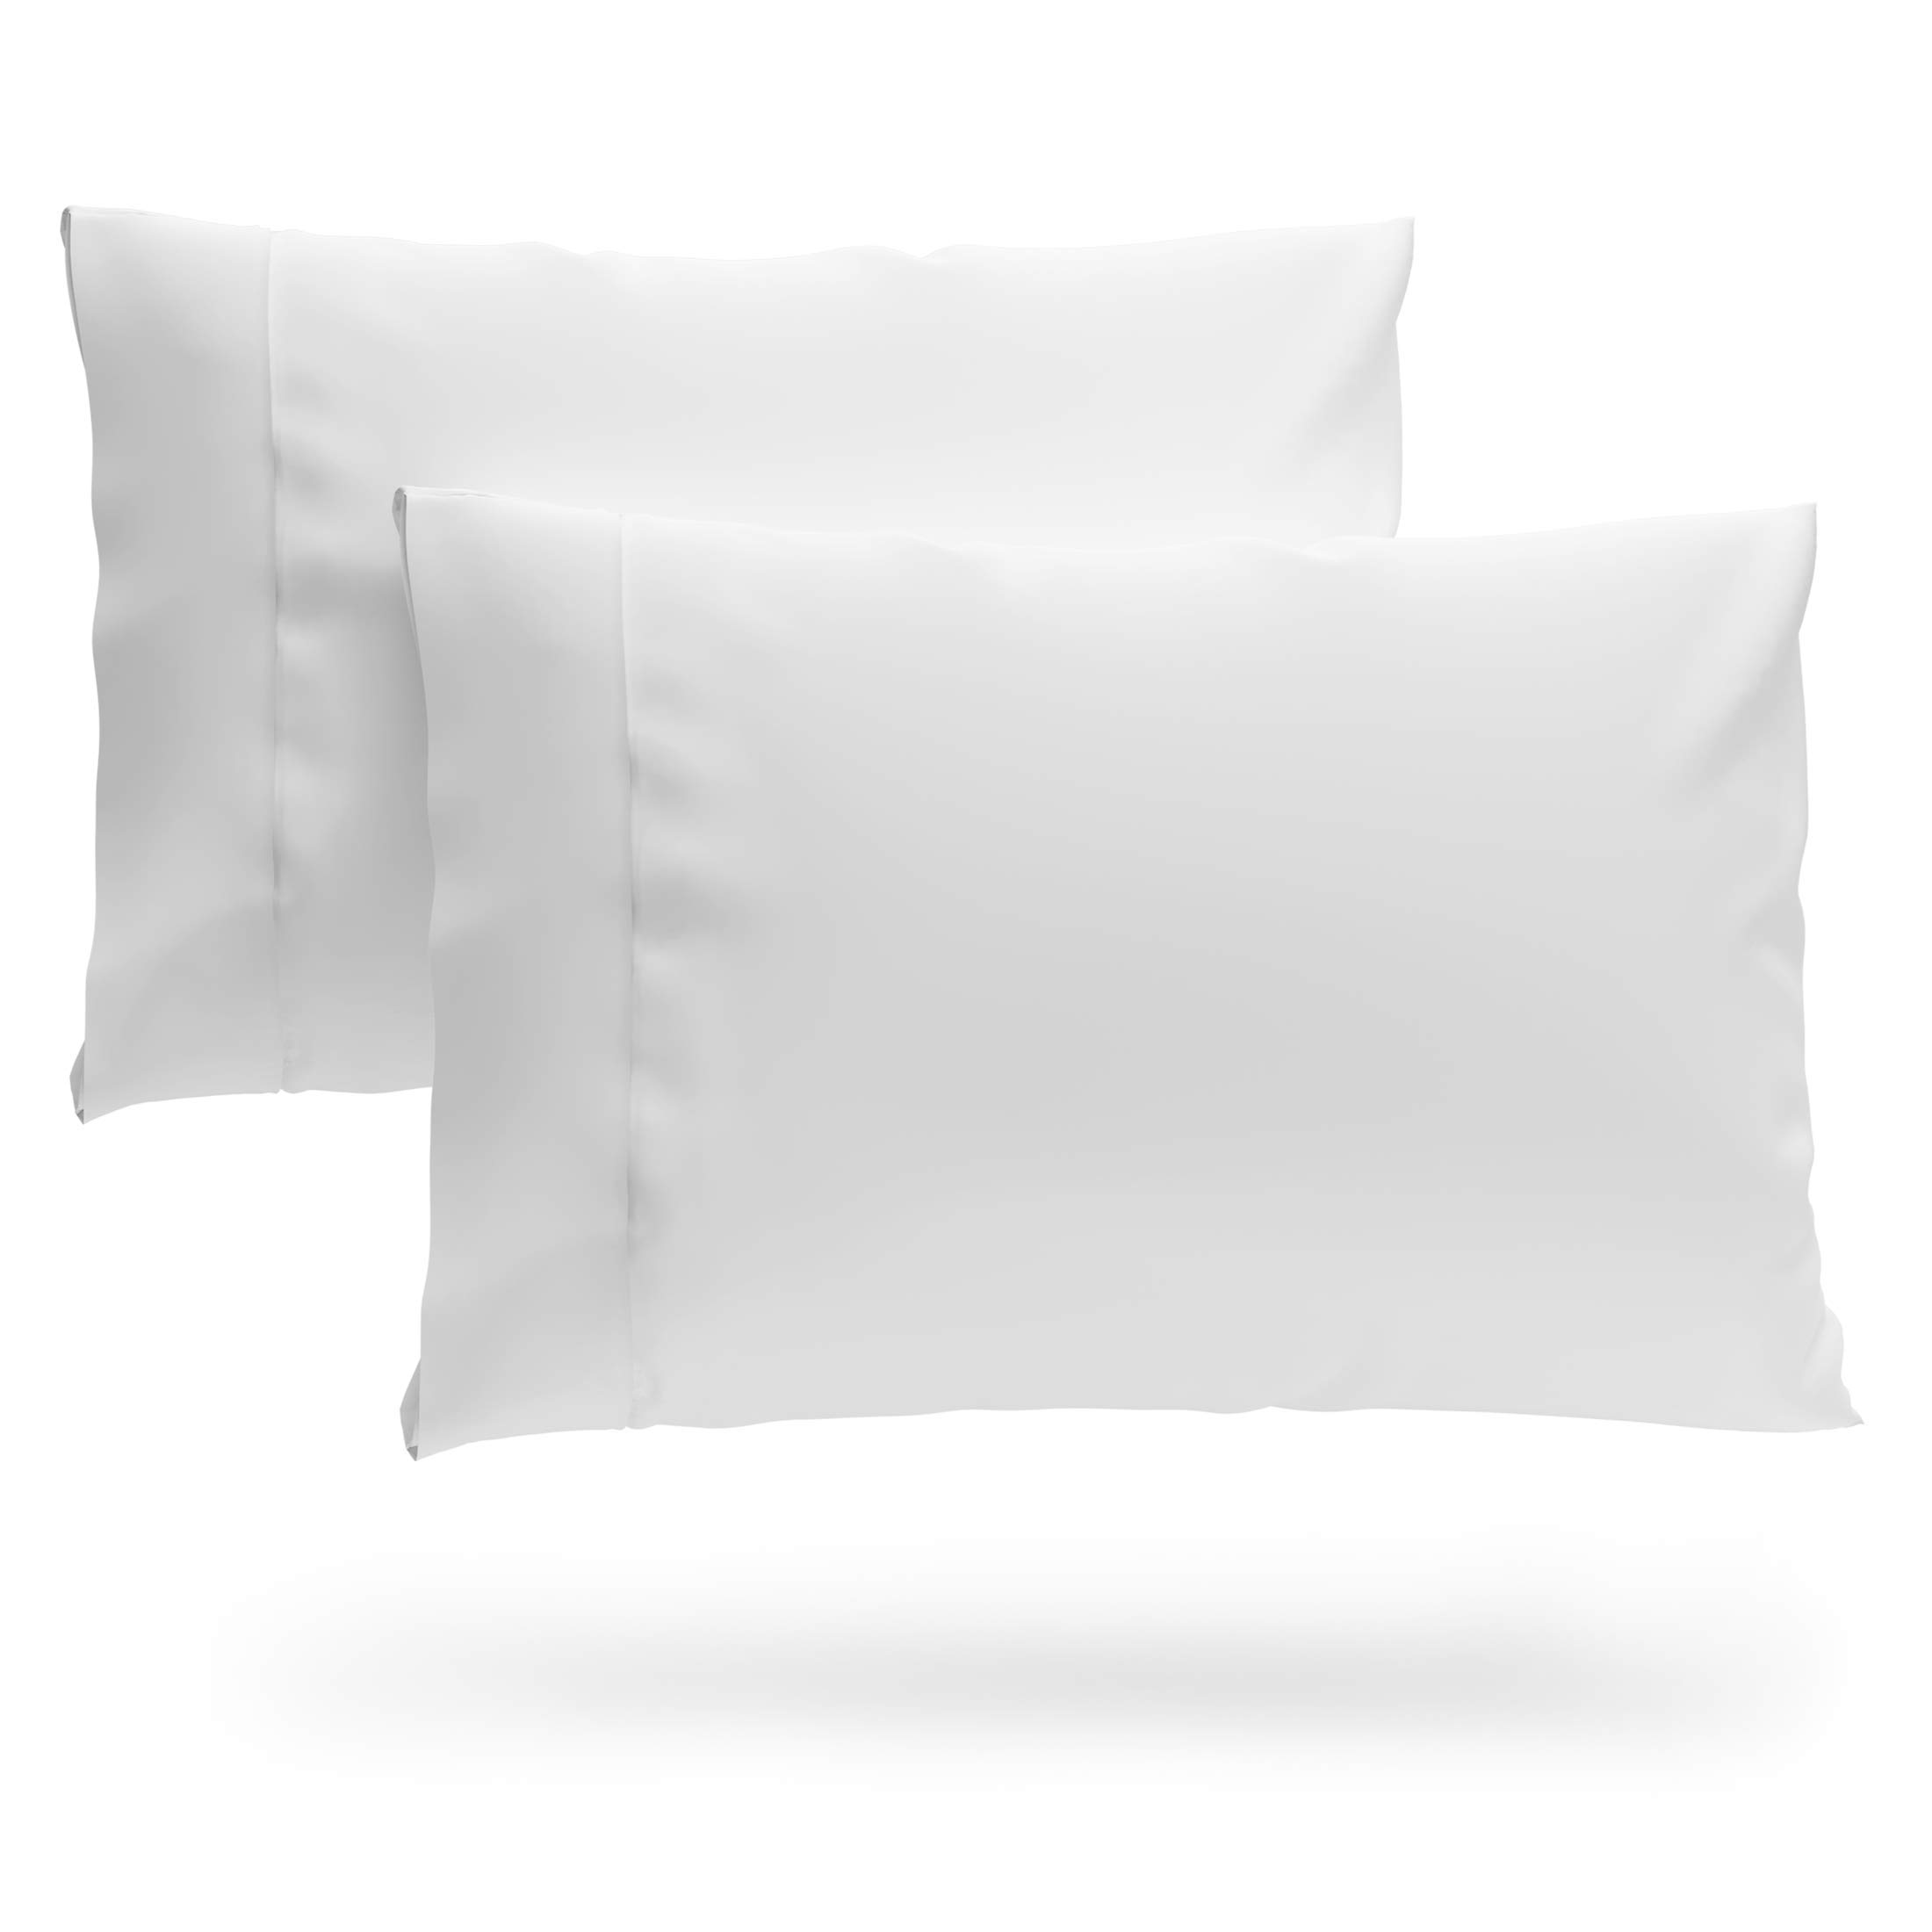 Book Cover Cosy House Collection Premium Bamboo Pillowcases - King, White Pillow Case Set of 2 - Ultra Soft & Cool Hypoallergenic Blend from Natural Bamboo Fiber King White